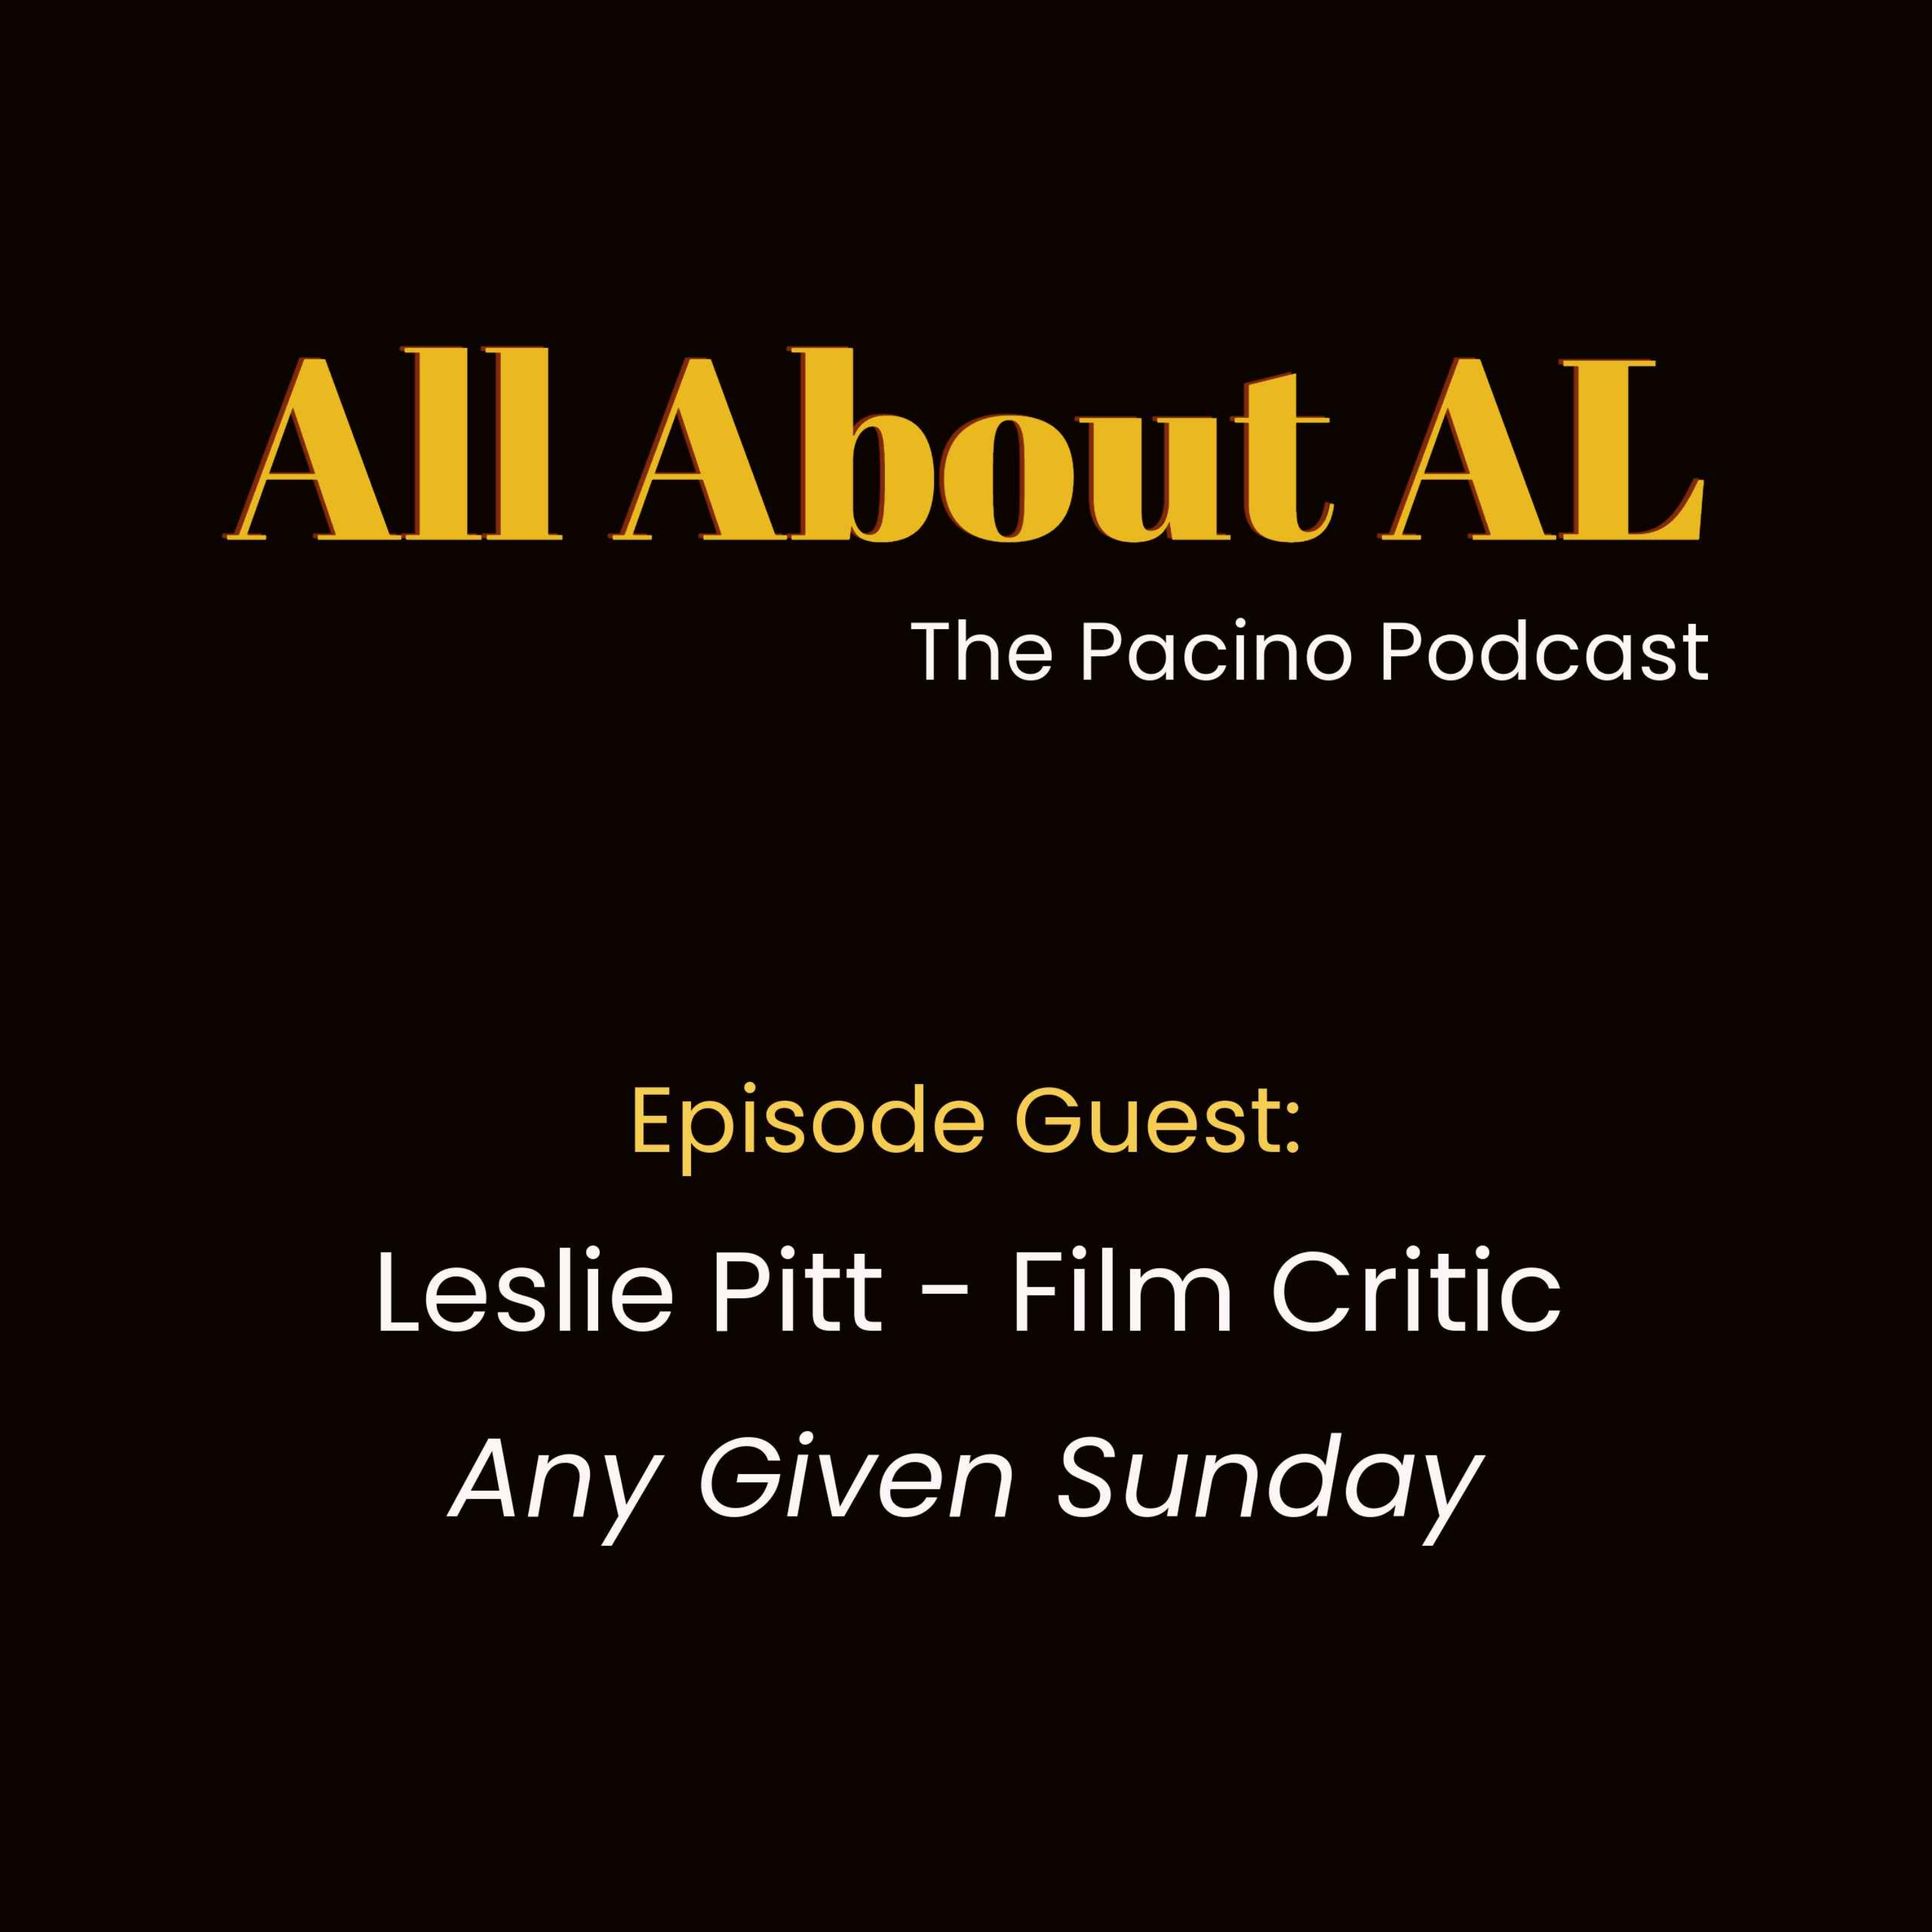 Episode 15: Any Given Sunday with Leslie Pitt